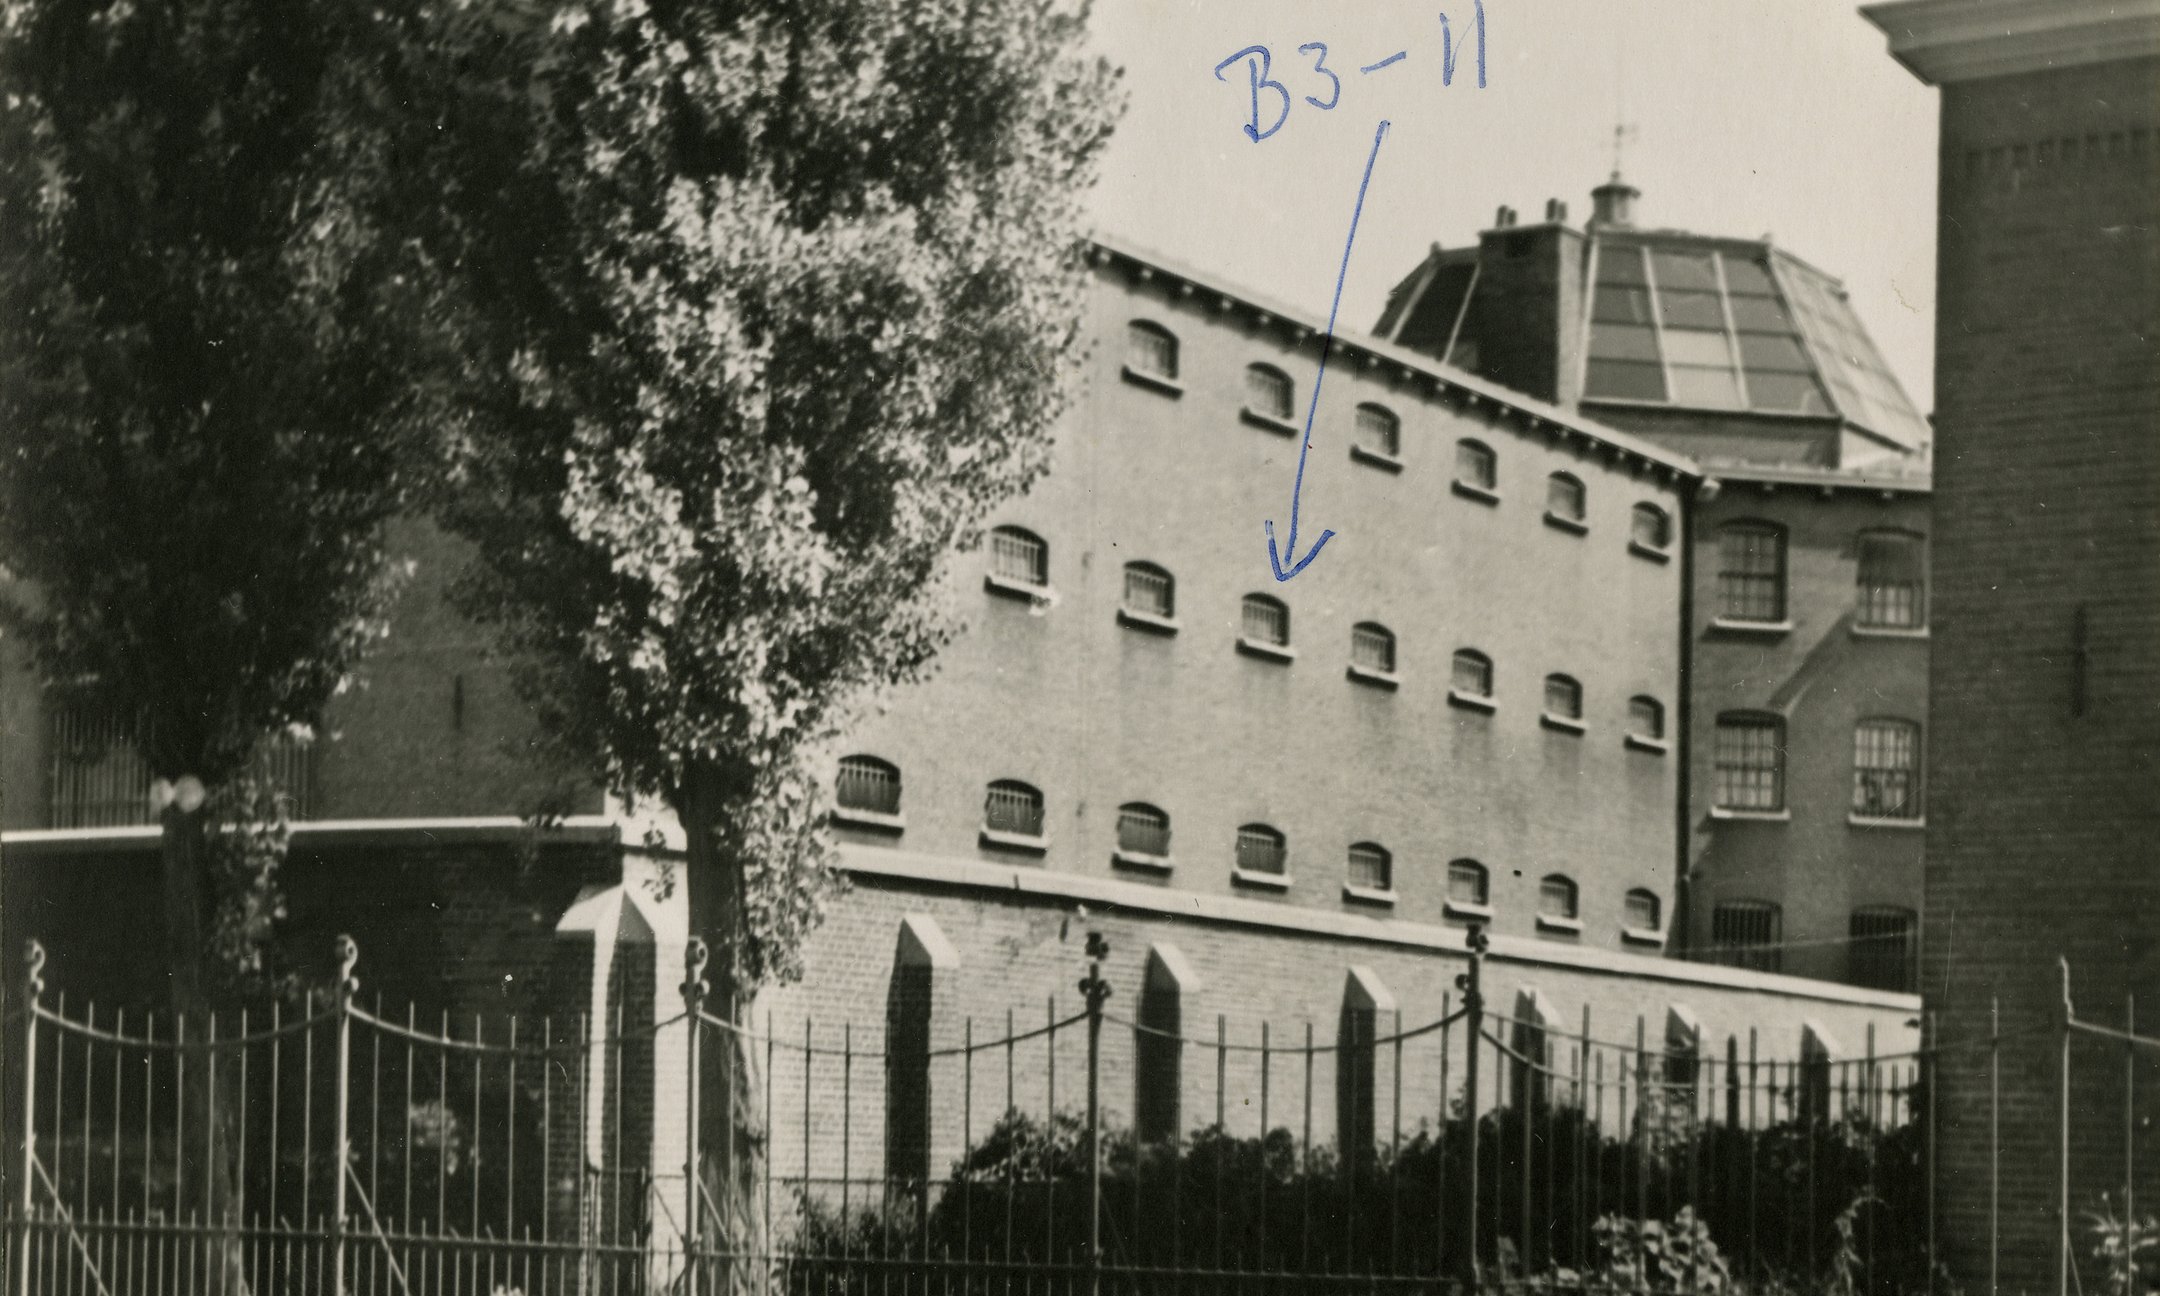 The Amsterdam prison where Johannes Kleiman and Victor Kugler were held for a month after their arrest. Victor Kugler has indicated the location of his cell.